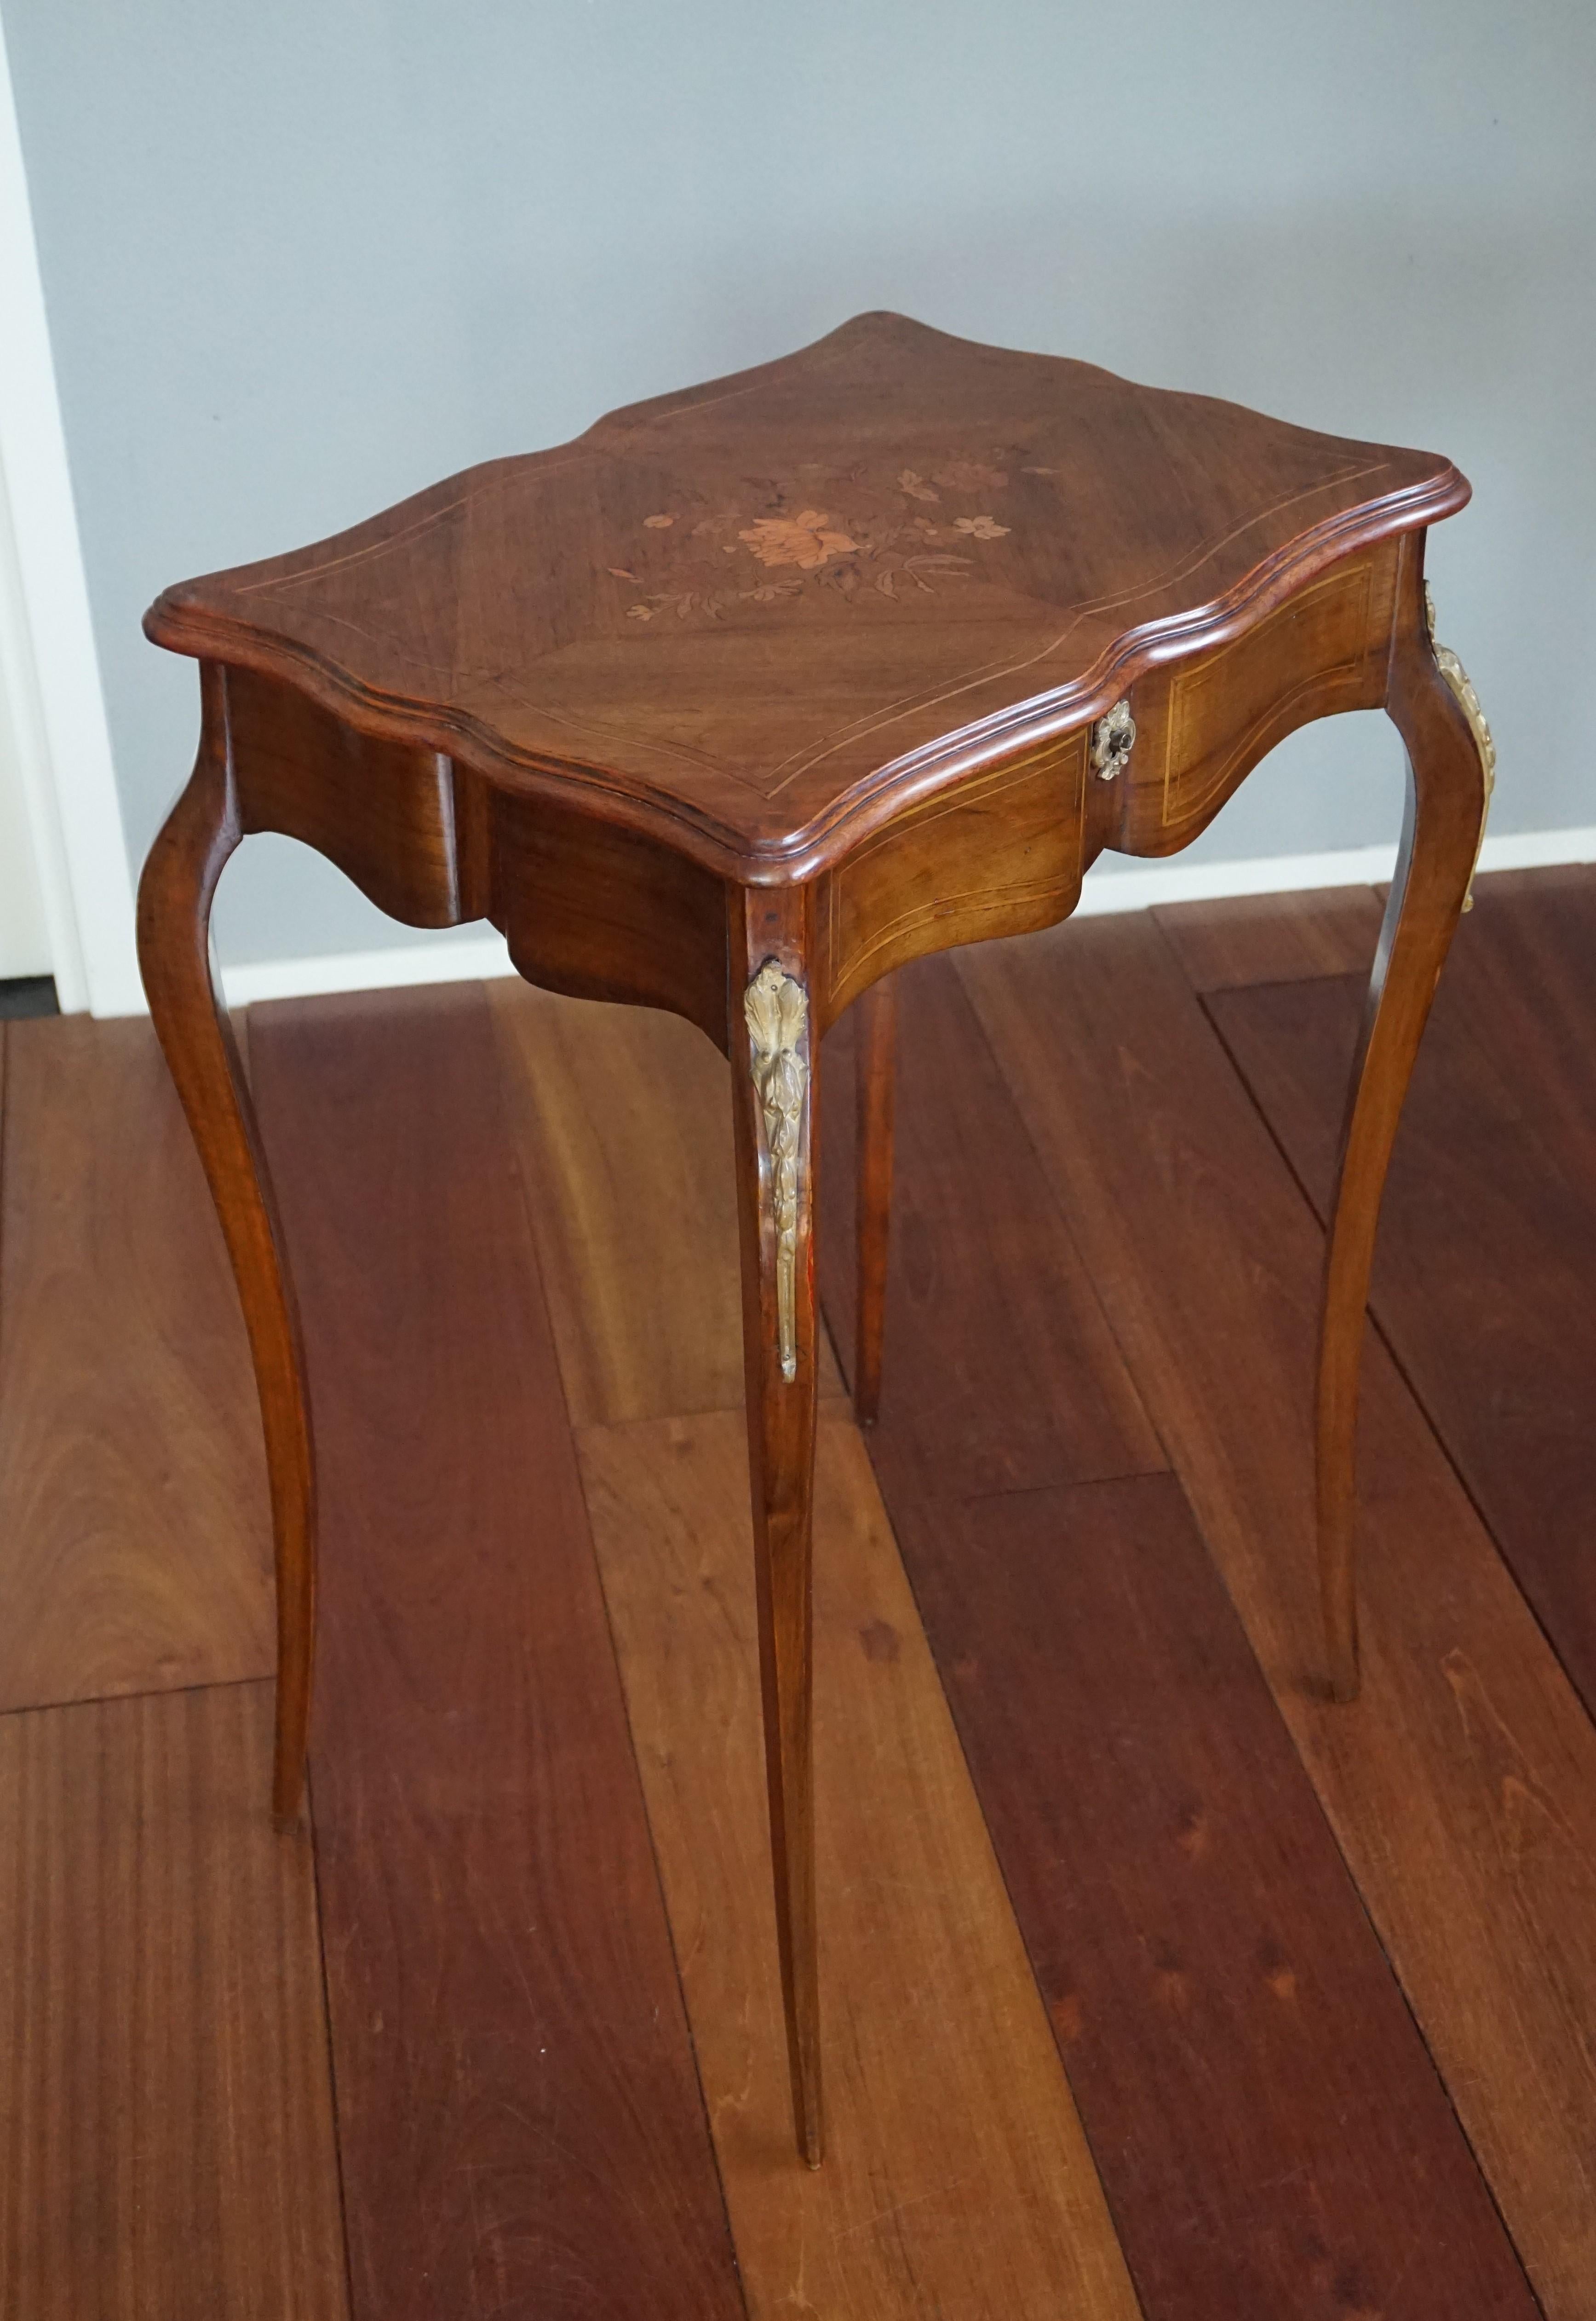 Elegant 19th Century Nutwood Jewelry Table Inlaid with Wonderful Flower Pattern For Sale 10